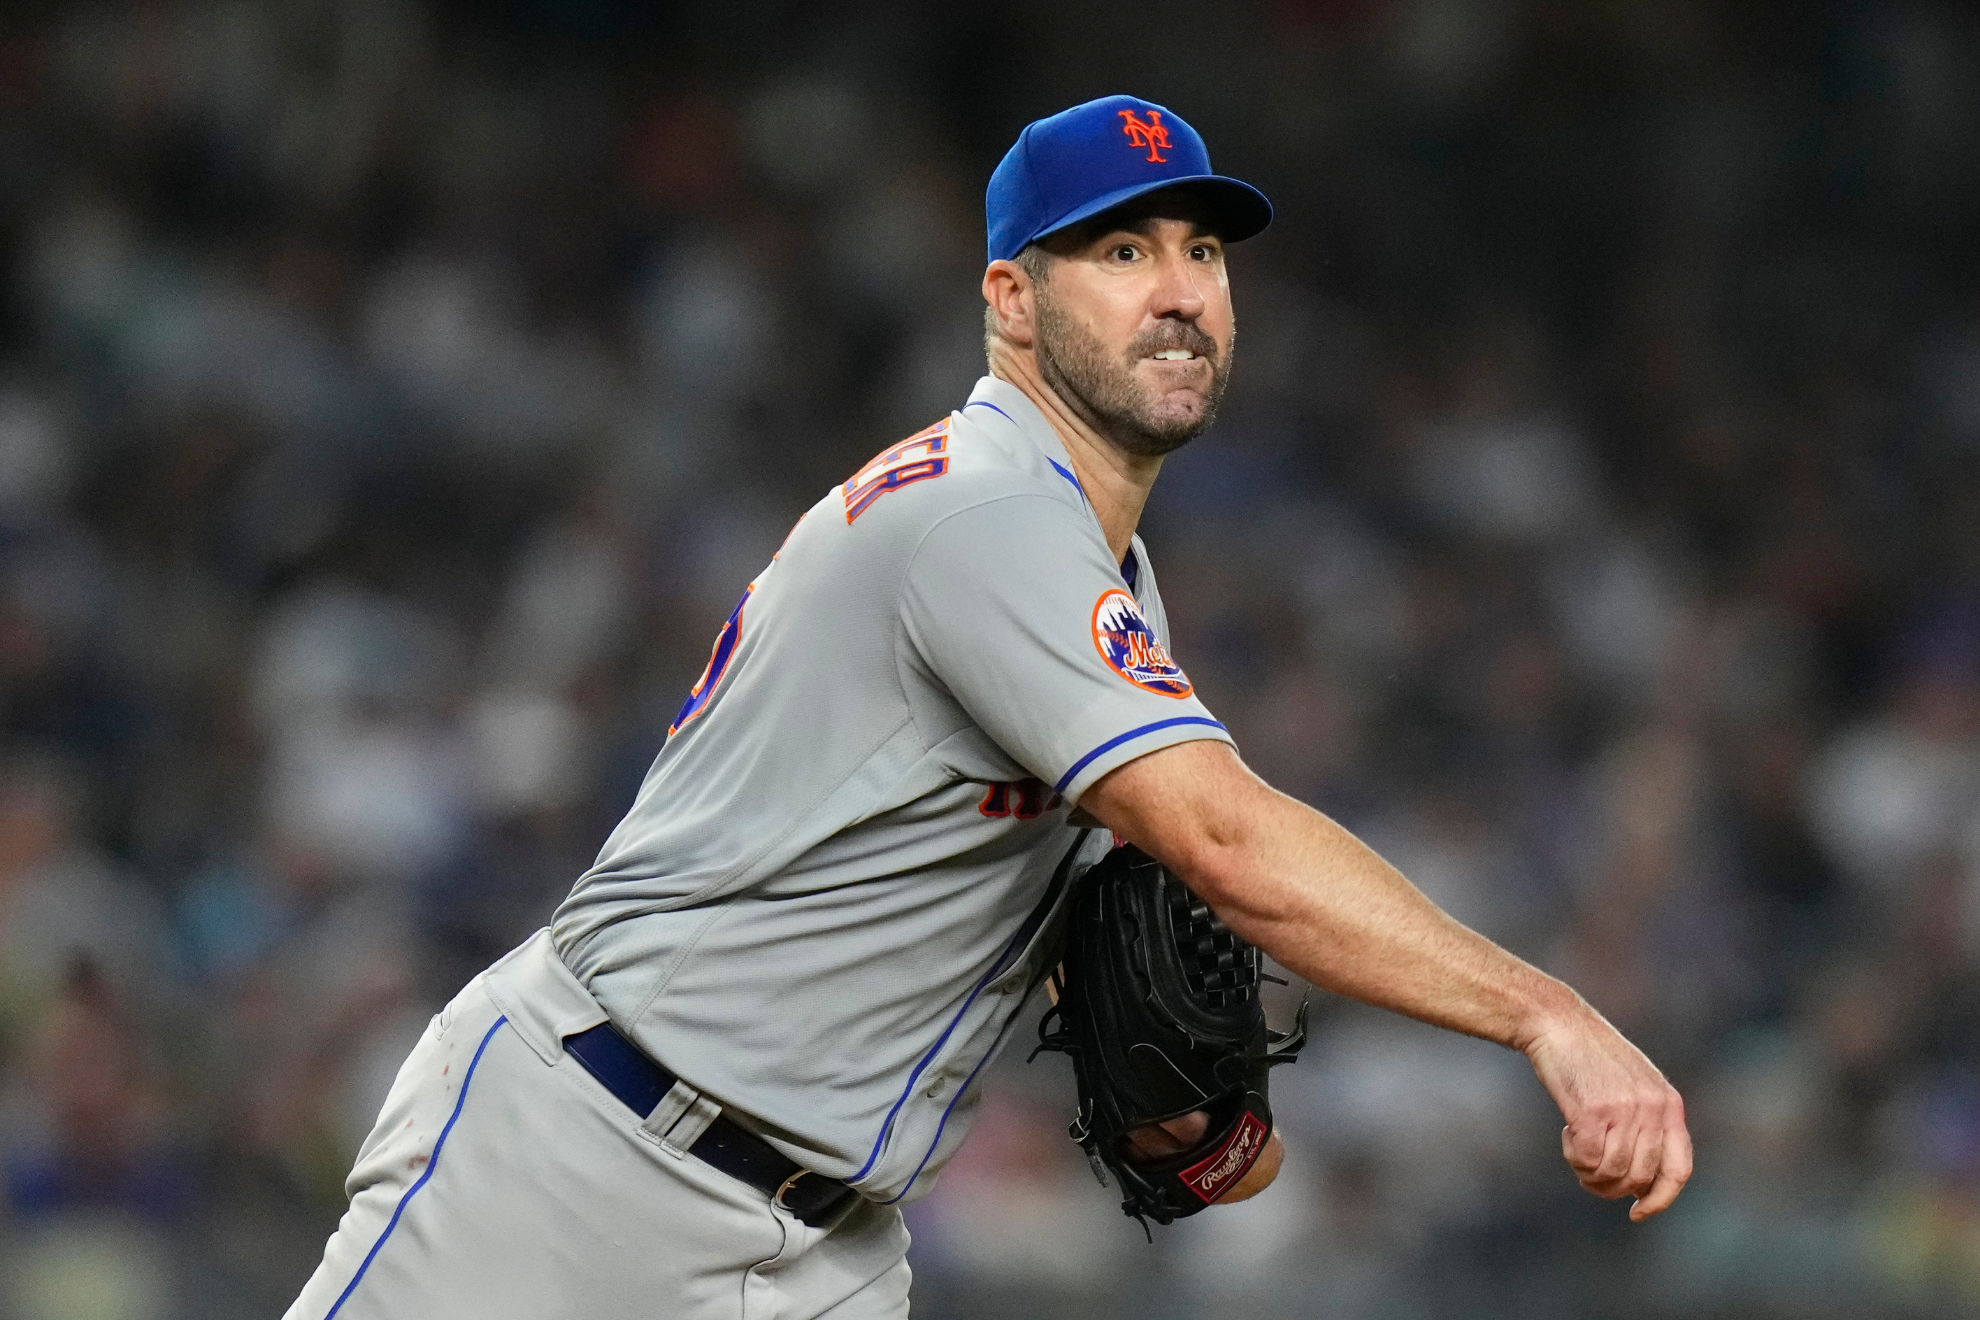 Justin Verlander has done his job this season, but the New York Mets haven't.